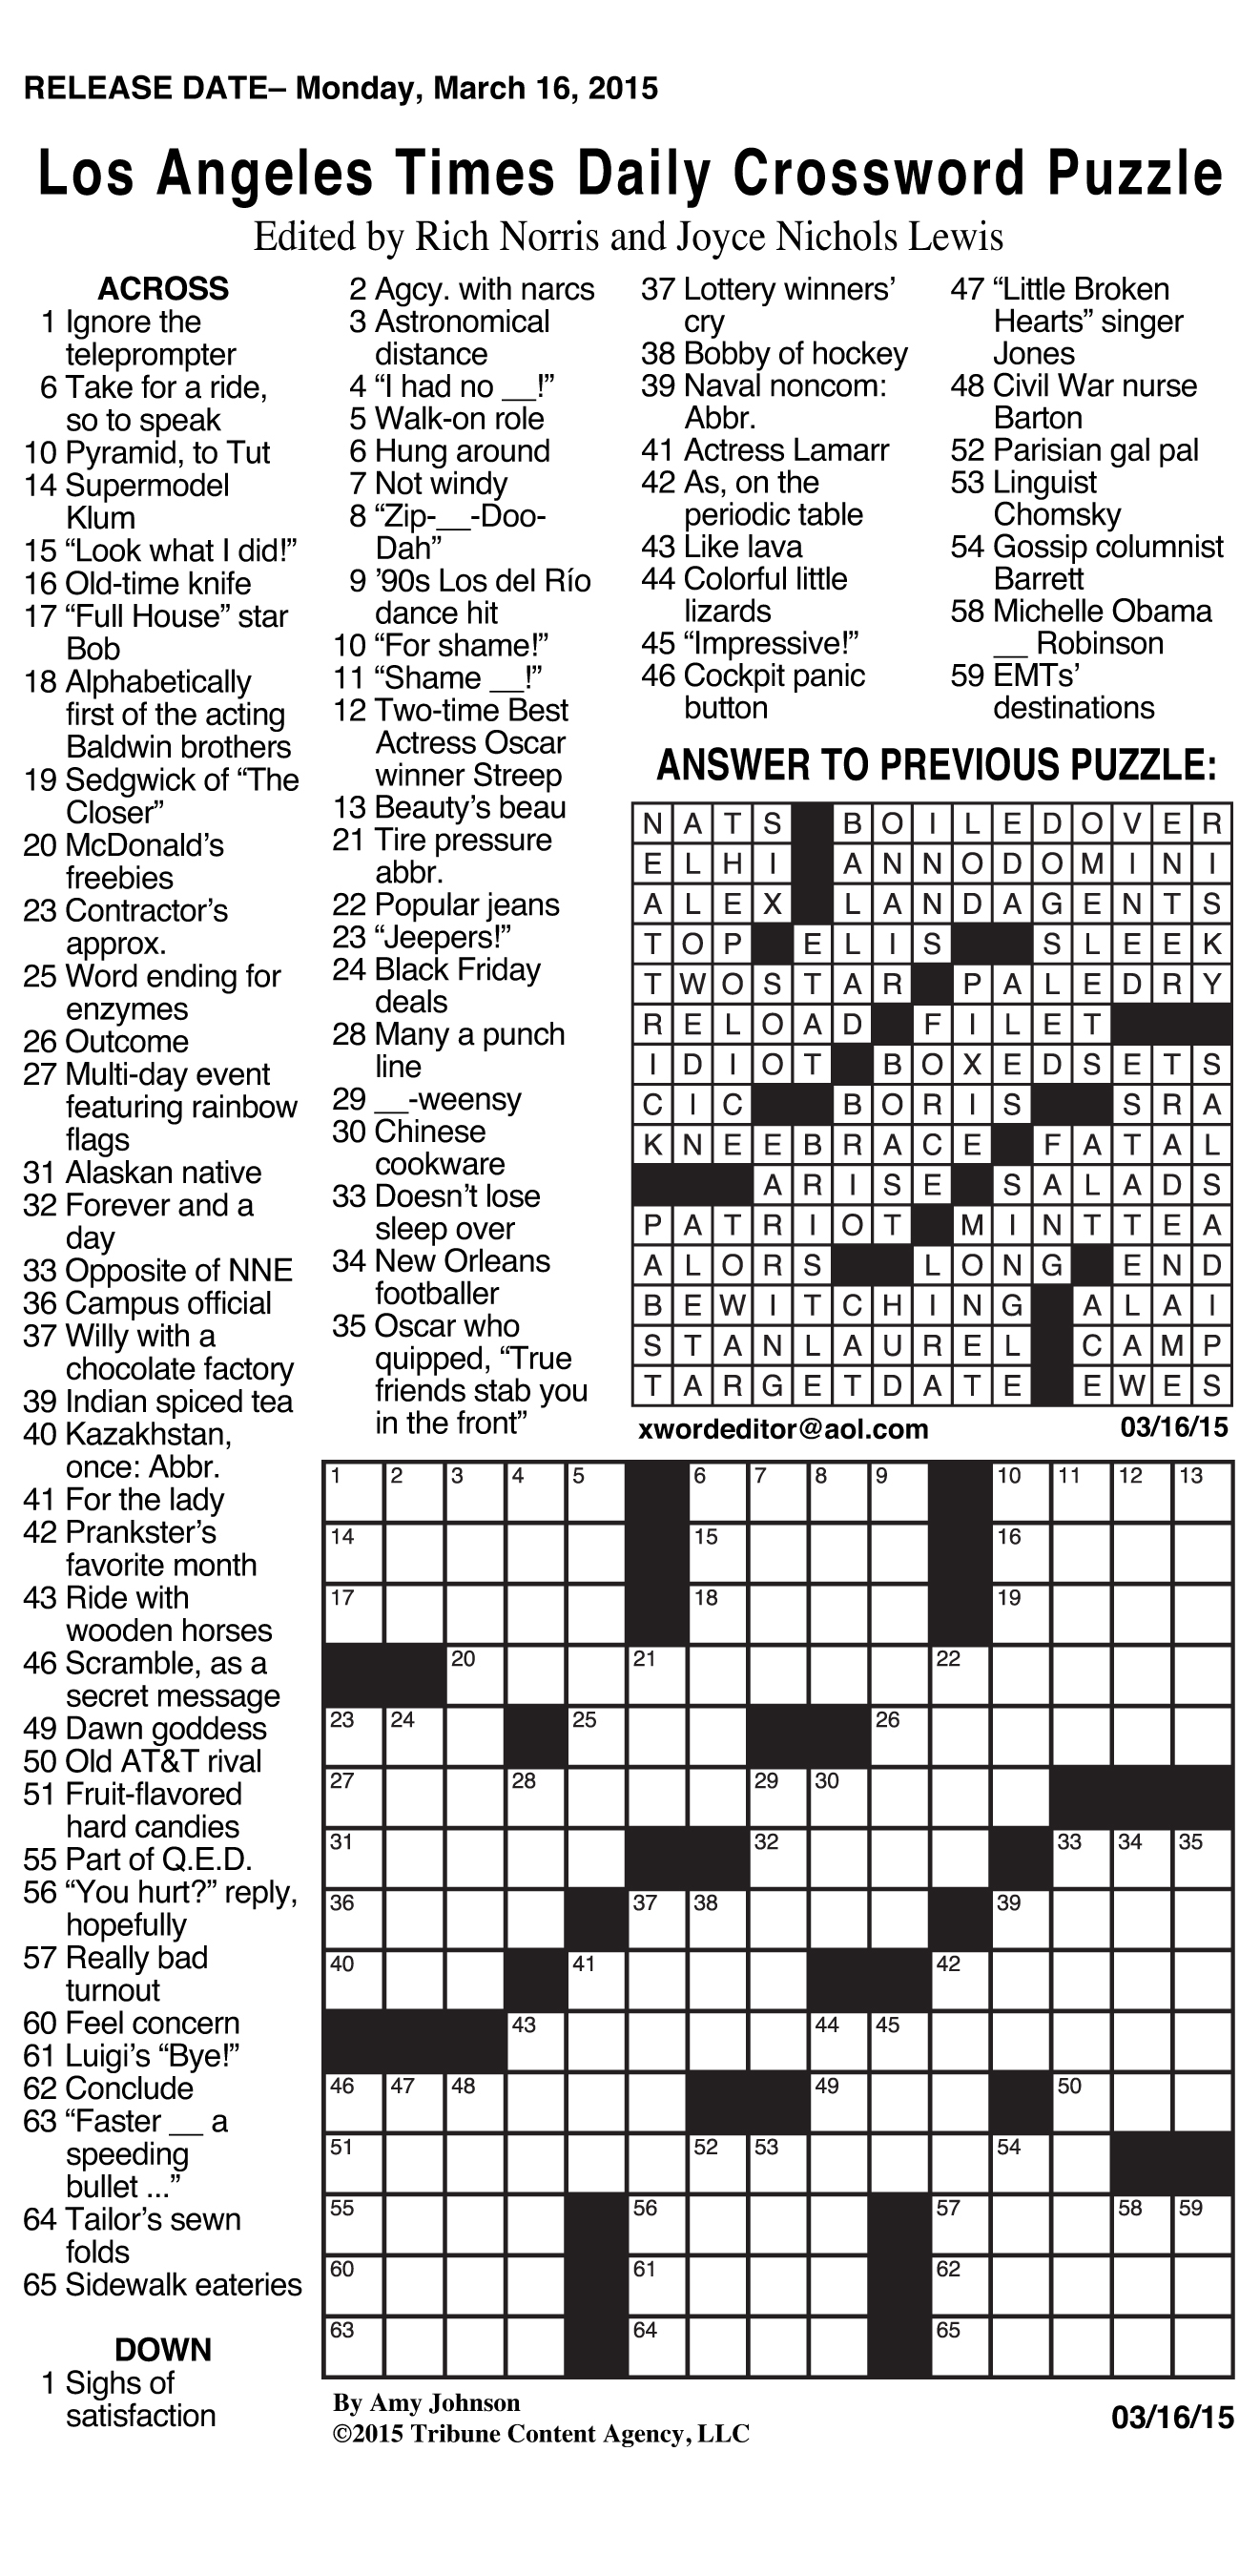 Sample Of Los Angeles Times Daily Crossword Puzzle | Tribune Content - Usa Today Printable Crossword Puzzles 2015